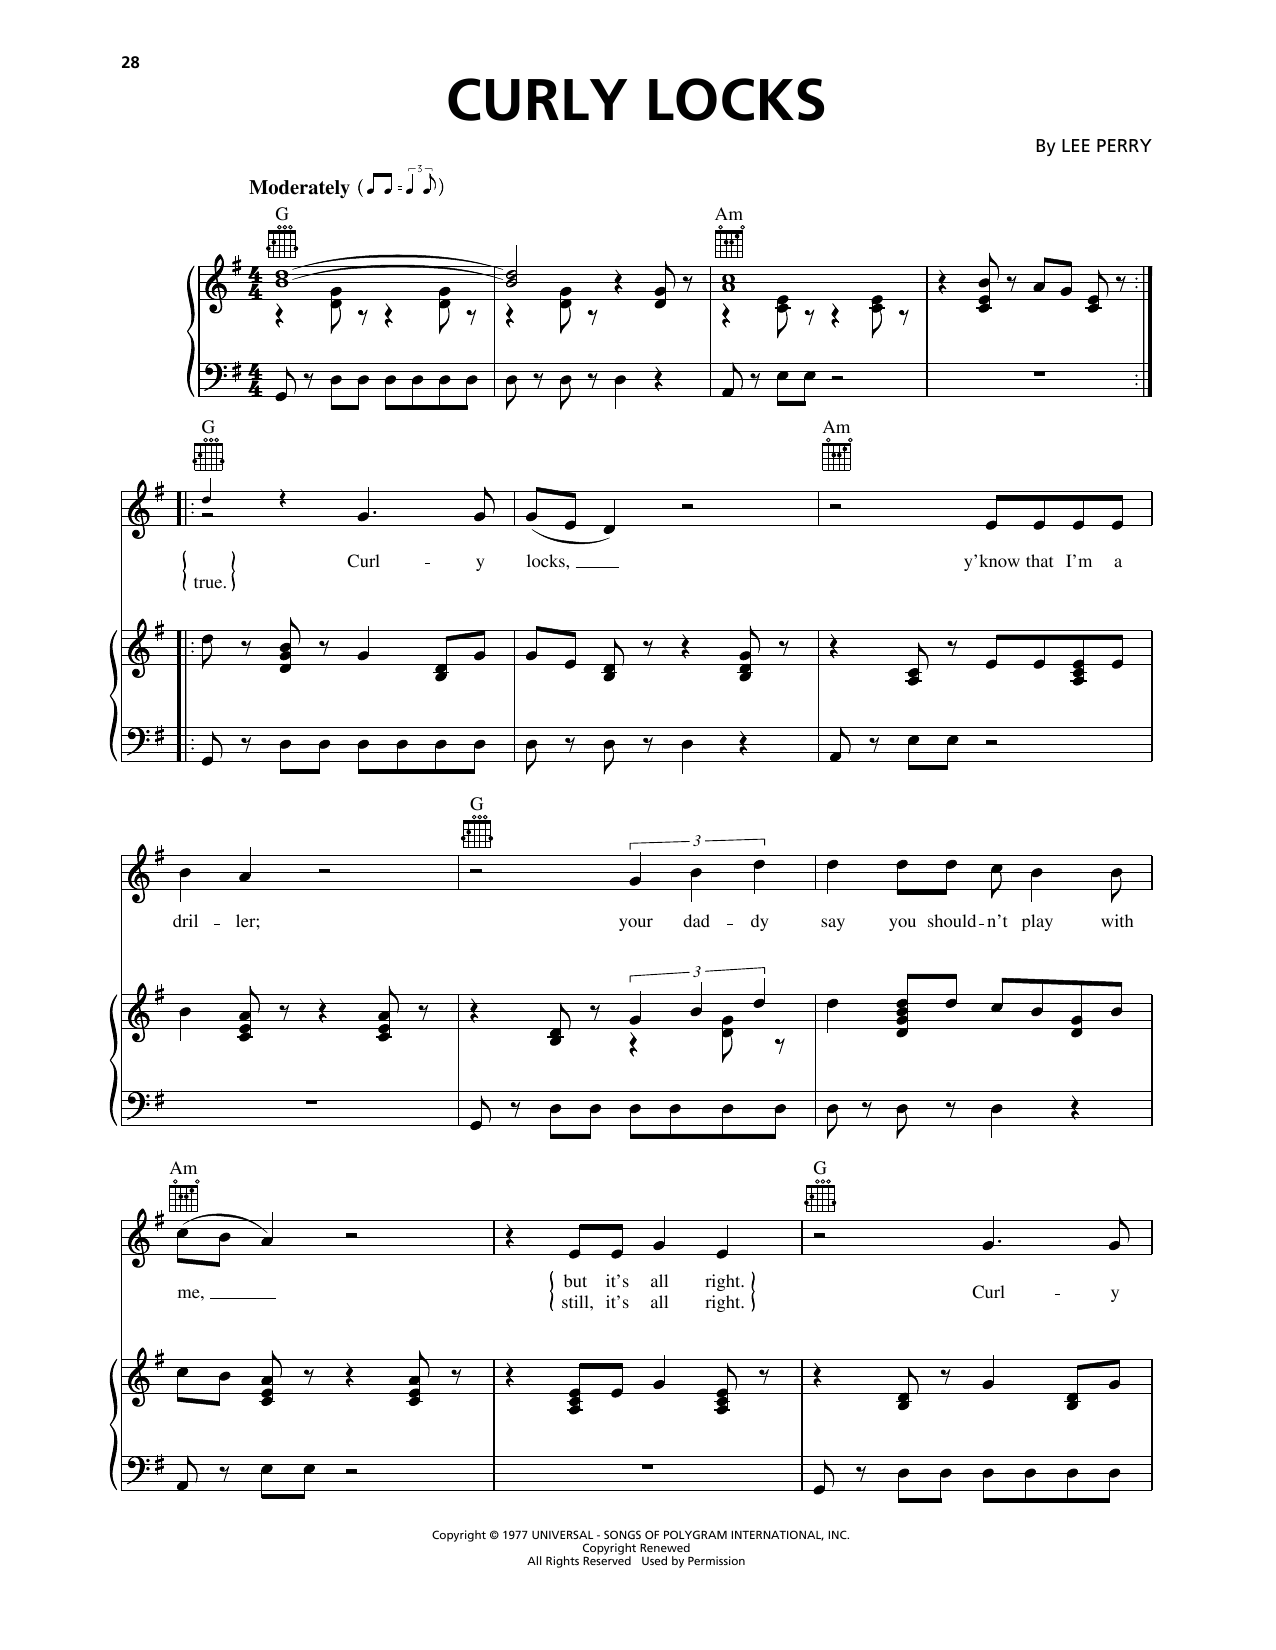 Download Lee Perry Curly Locks Sheet Music